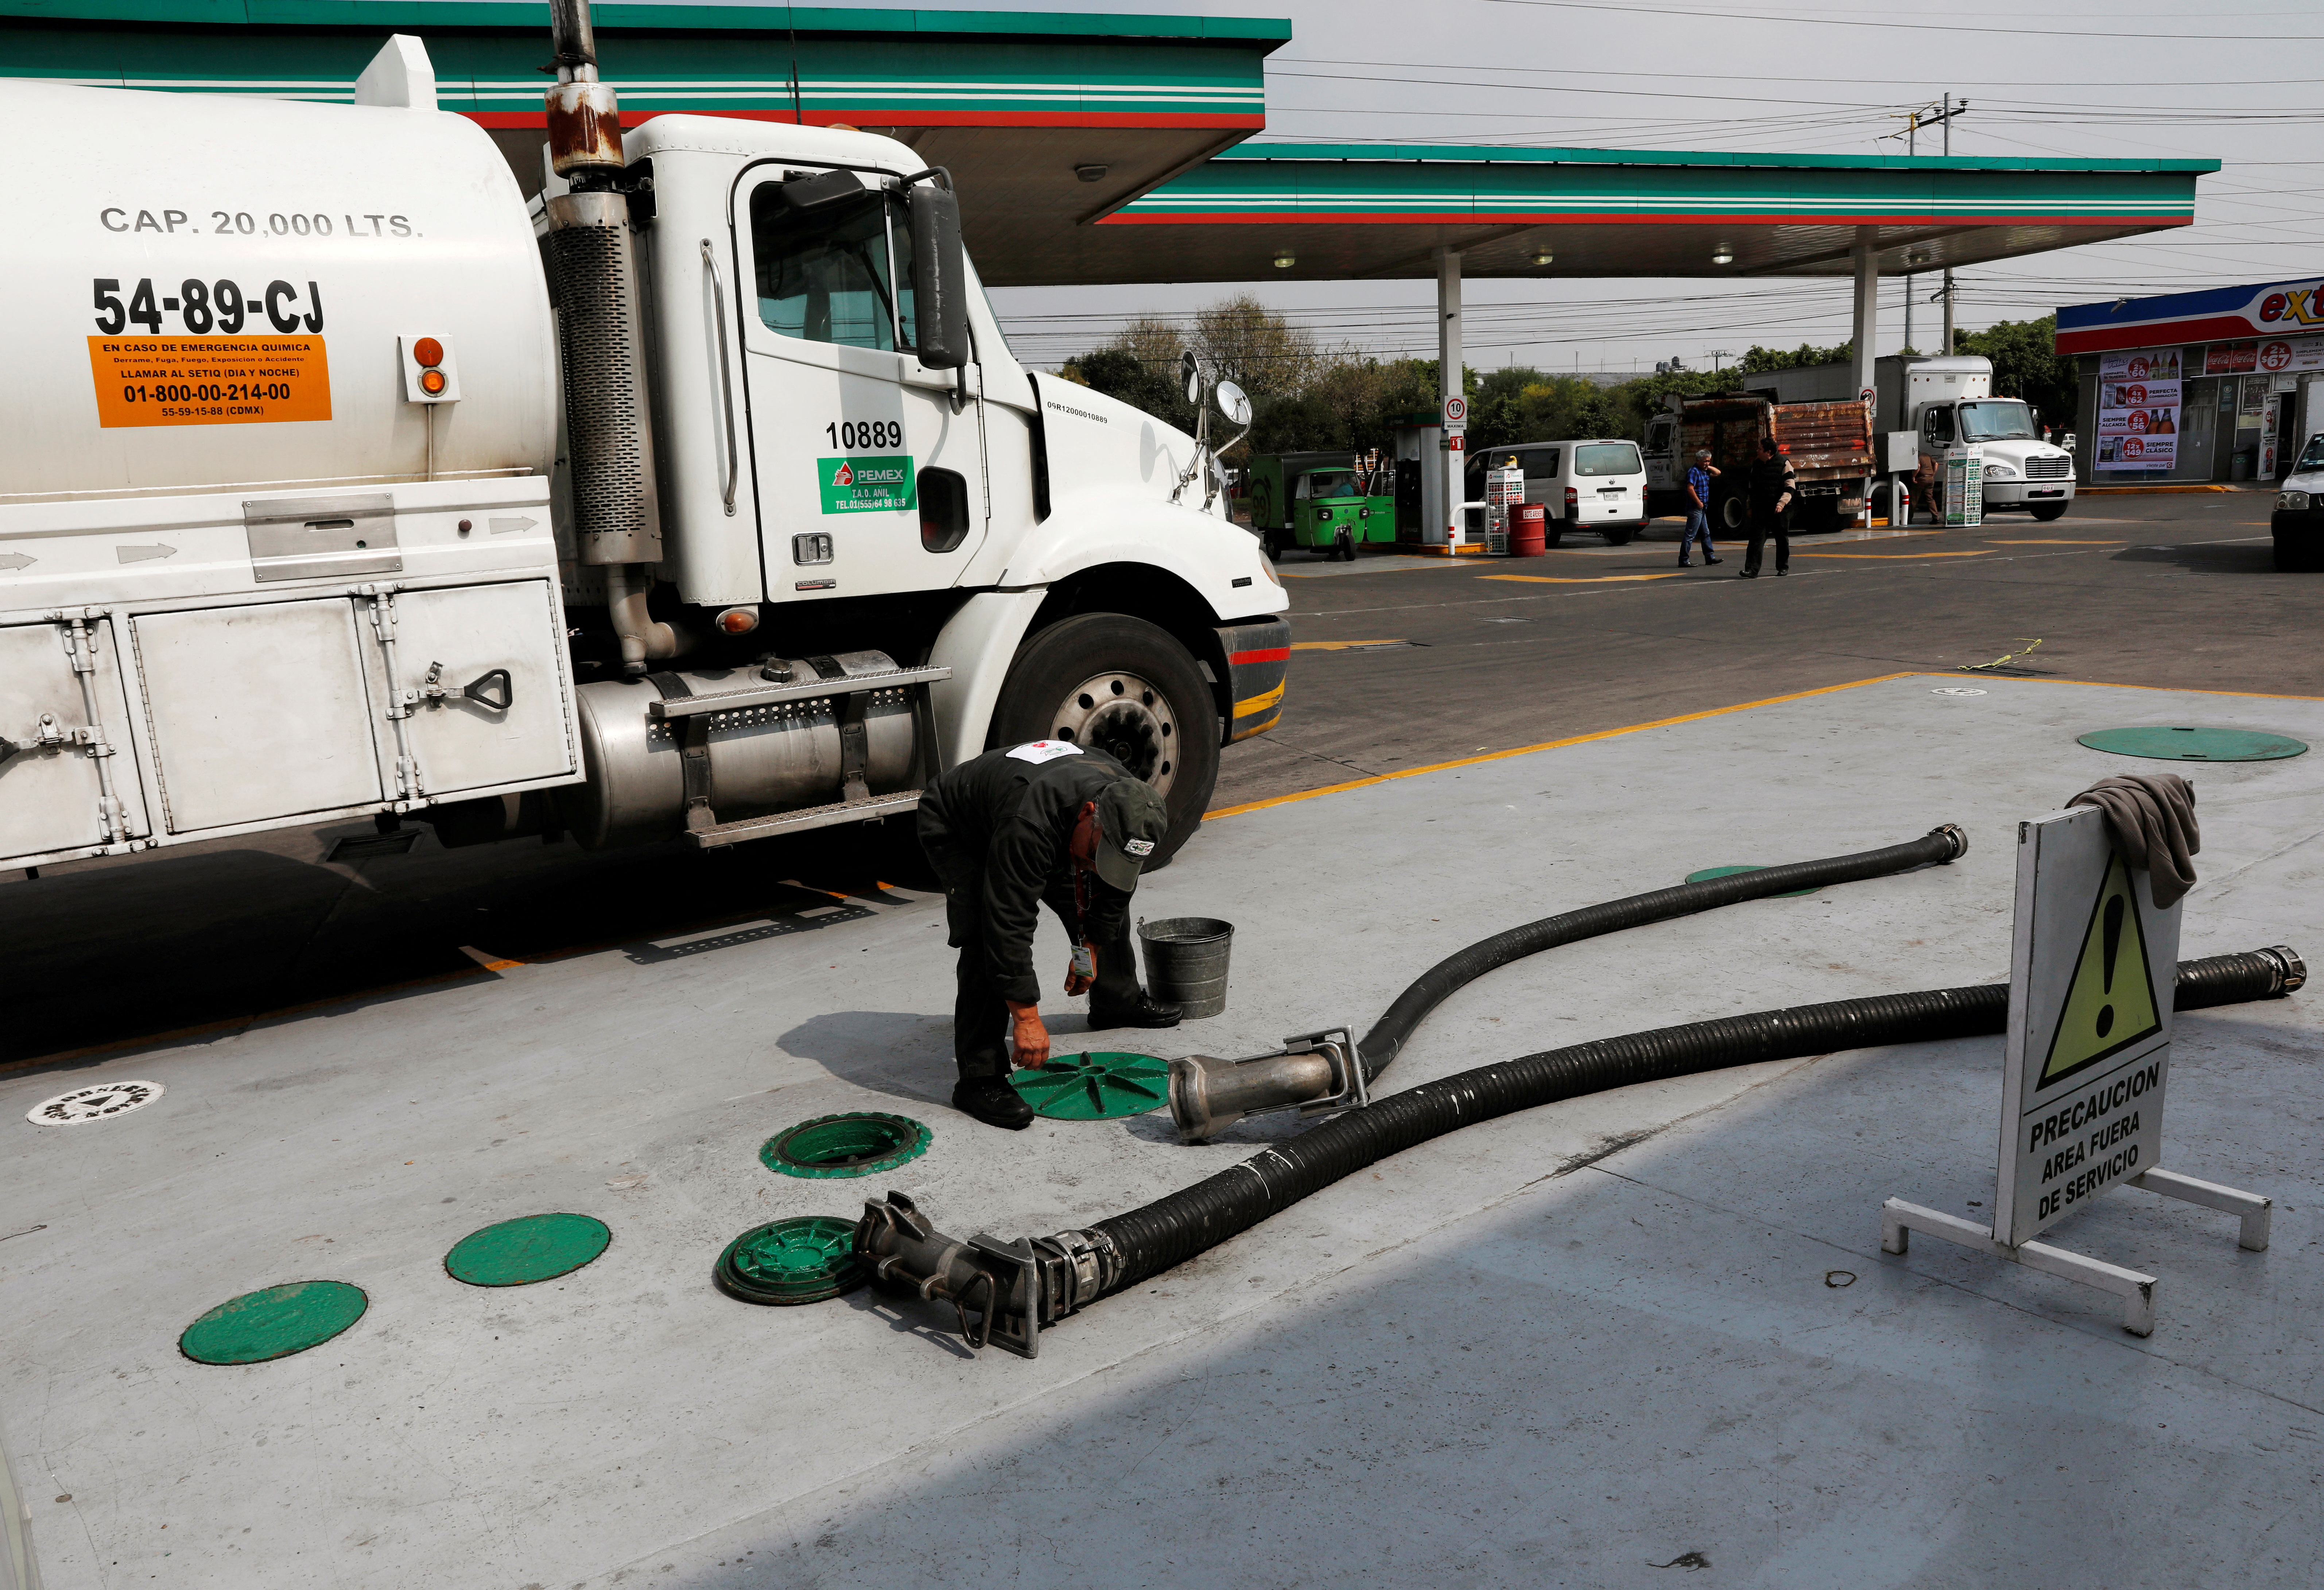 A tanker truck delivers fuel at a gas station in Mexico City